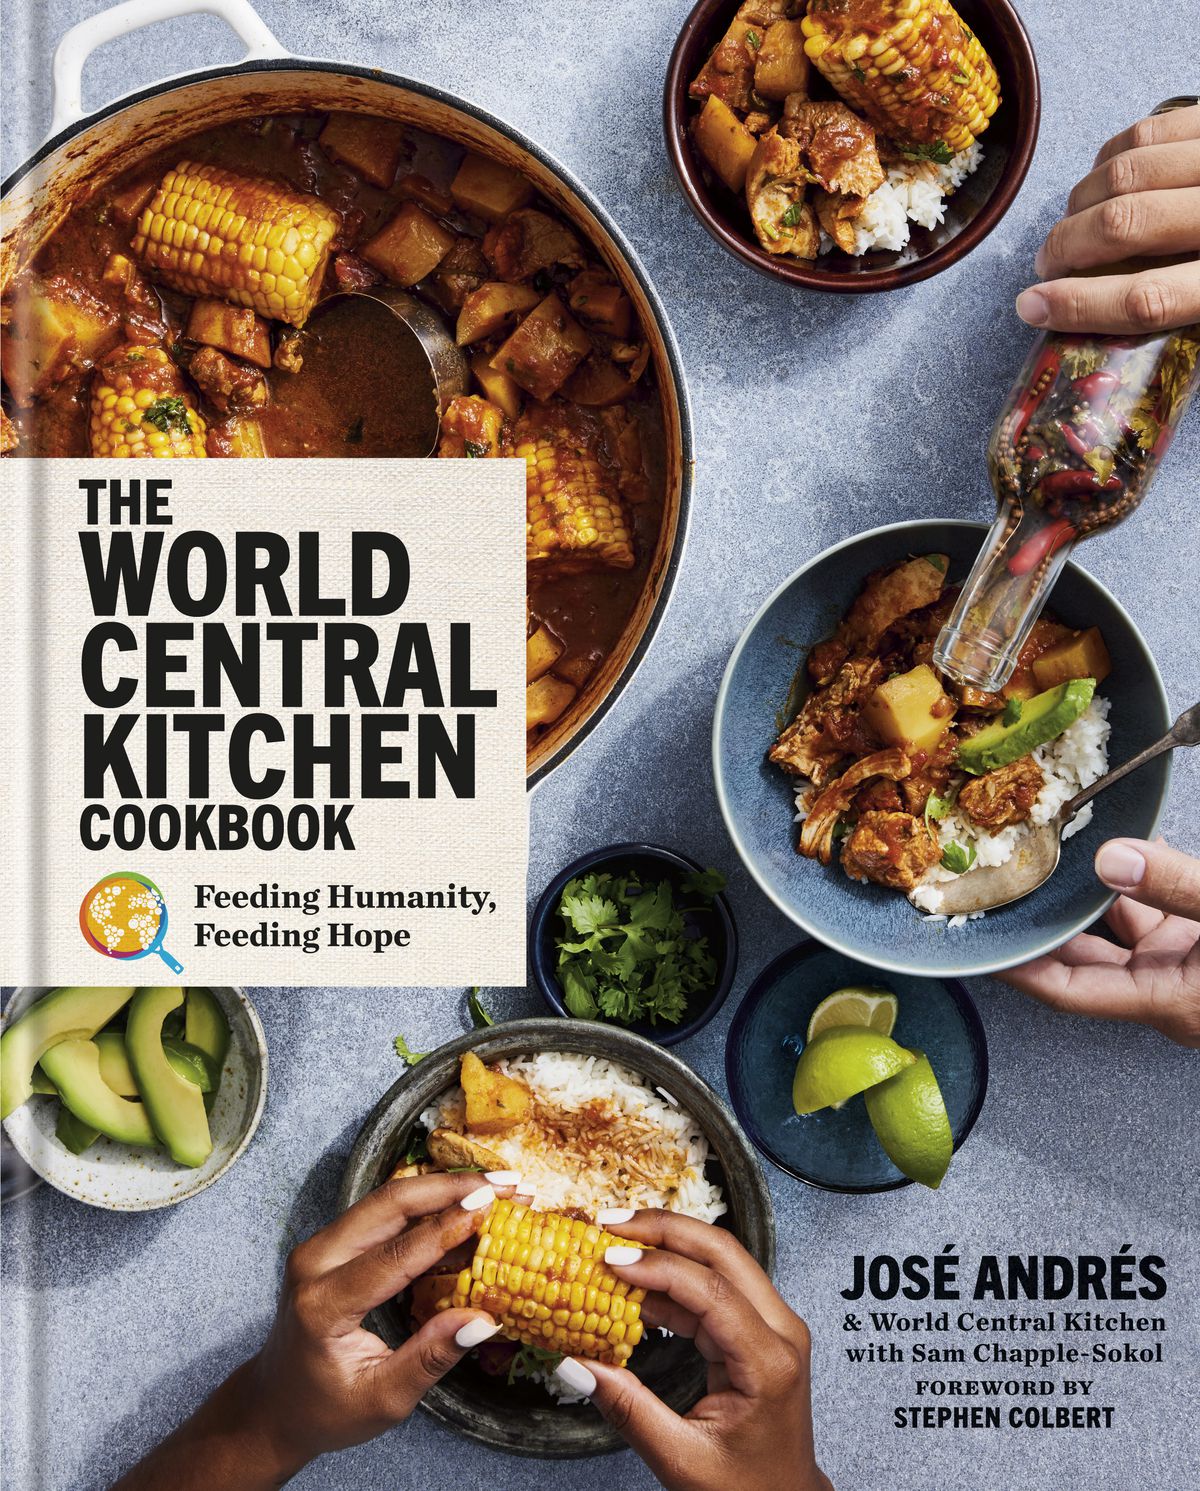 A cookbook cover with the title “The World Central Kitchen Cookbook, Feeding Humanity, Feeding Hope” and author text of “Jose Andres &amp; World Central Kitchen with Sam Chapple-Sokel, Foreword by Stephen Colbert” and images of plated foods.